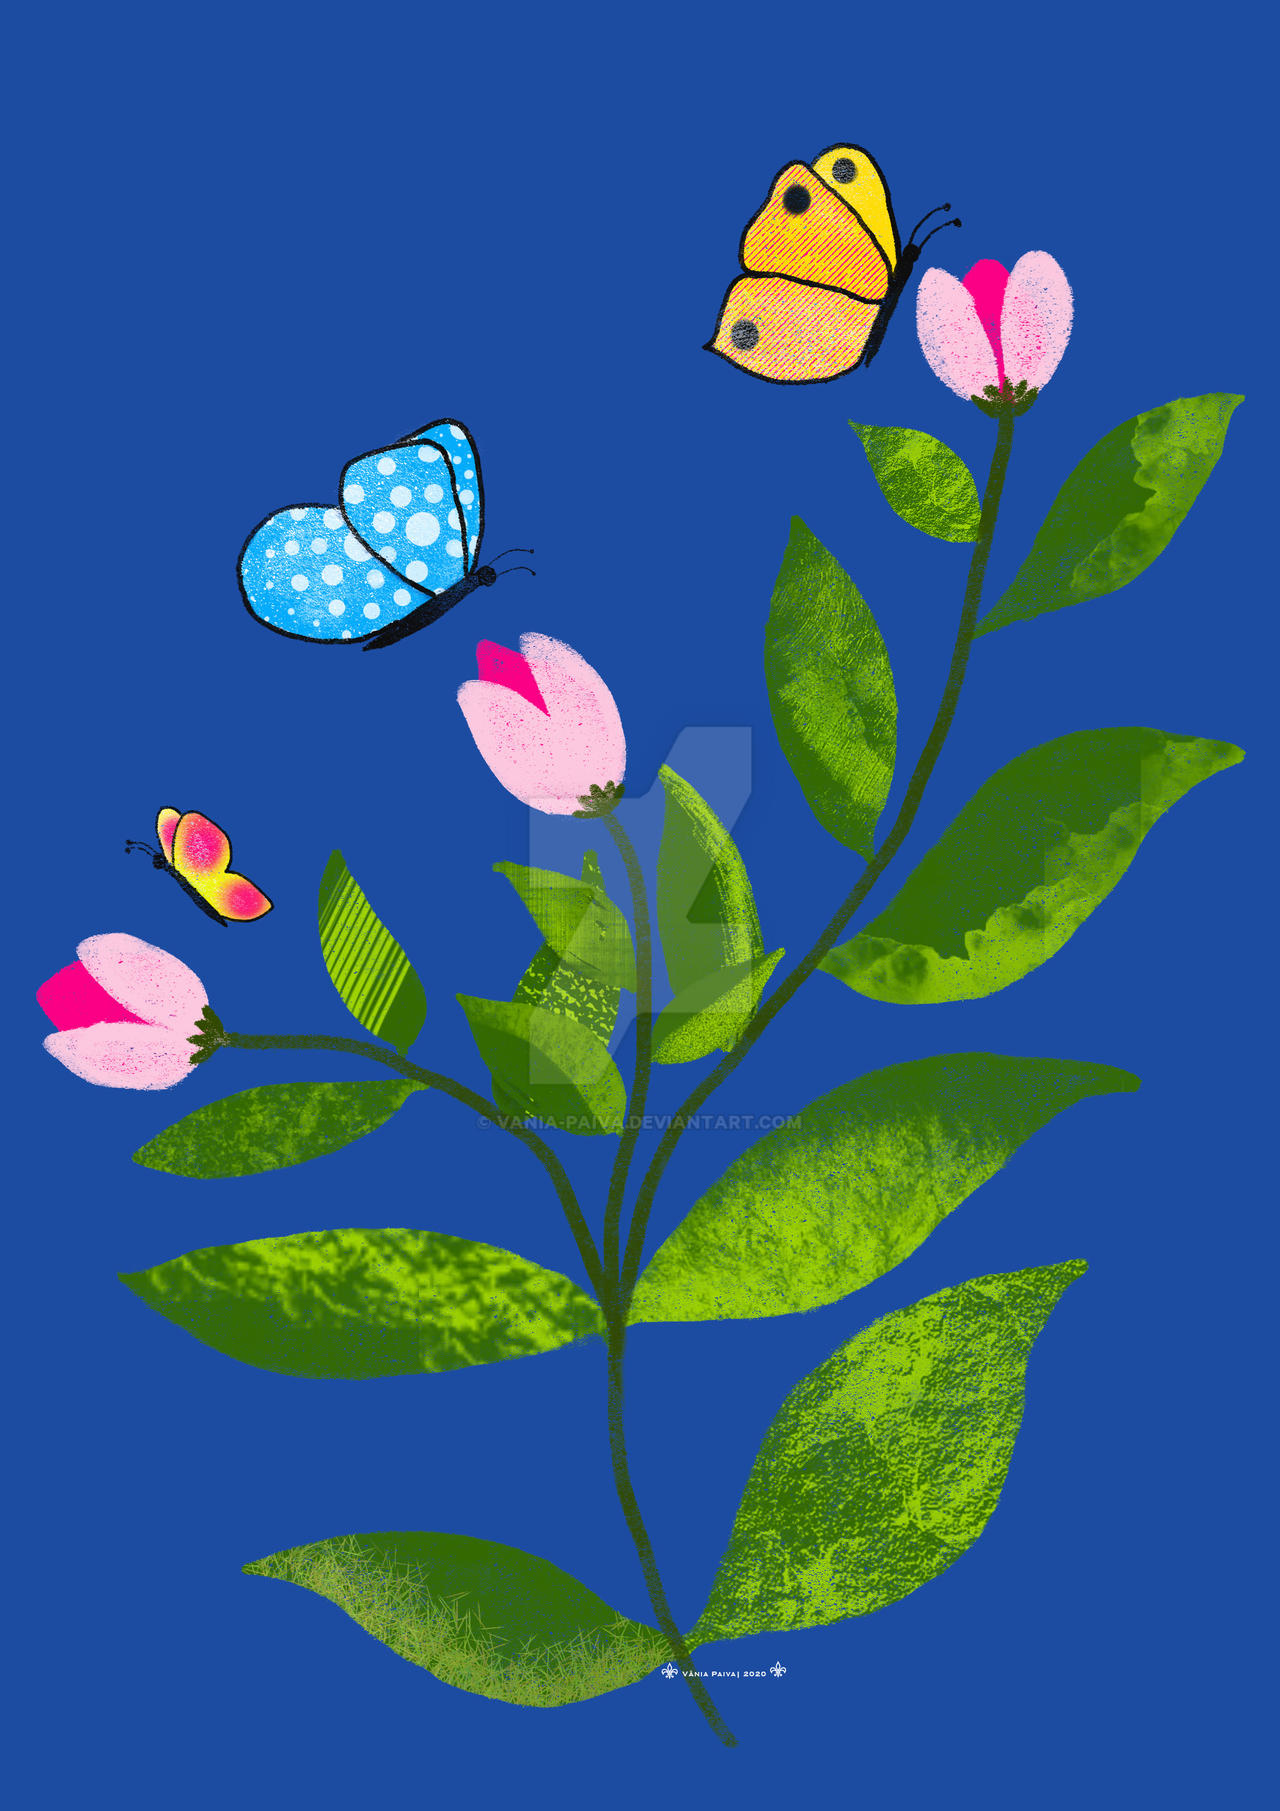 Flowers and Butterflies by Vania-Paiva on DeviantArt